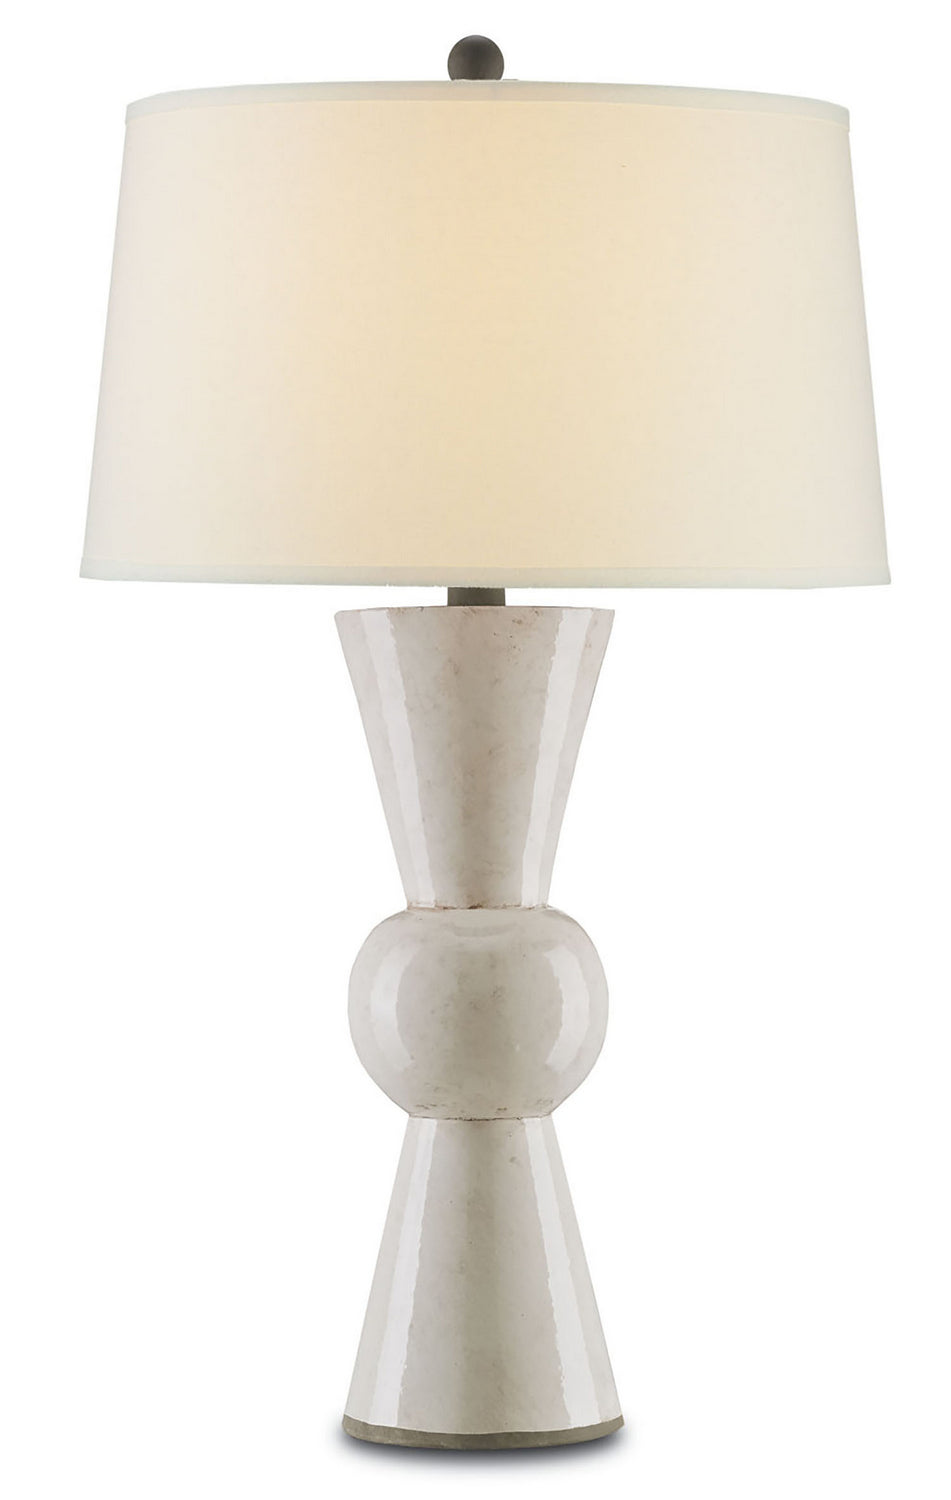 Currey and Company - 6198 - One Light Table Lamp - Upbeat